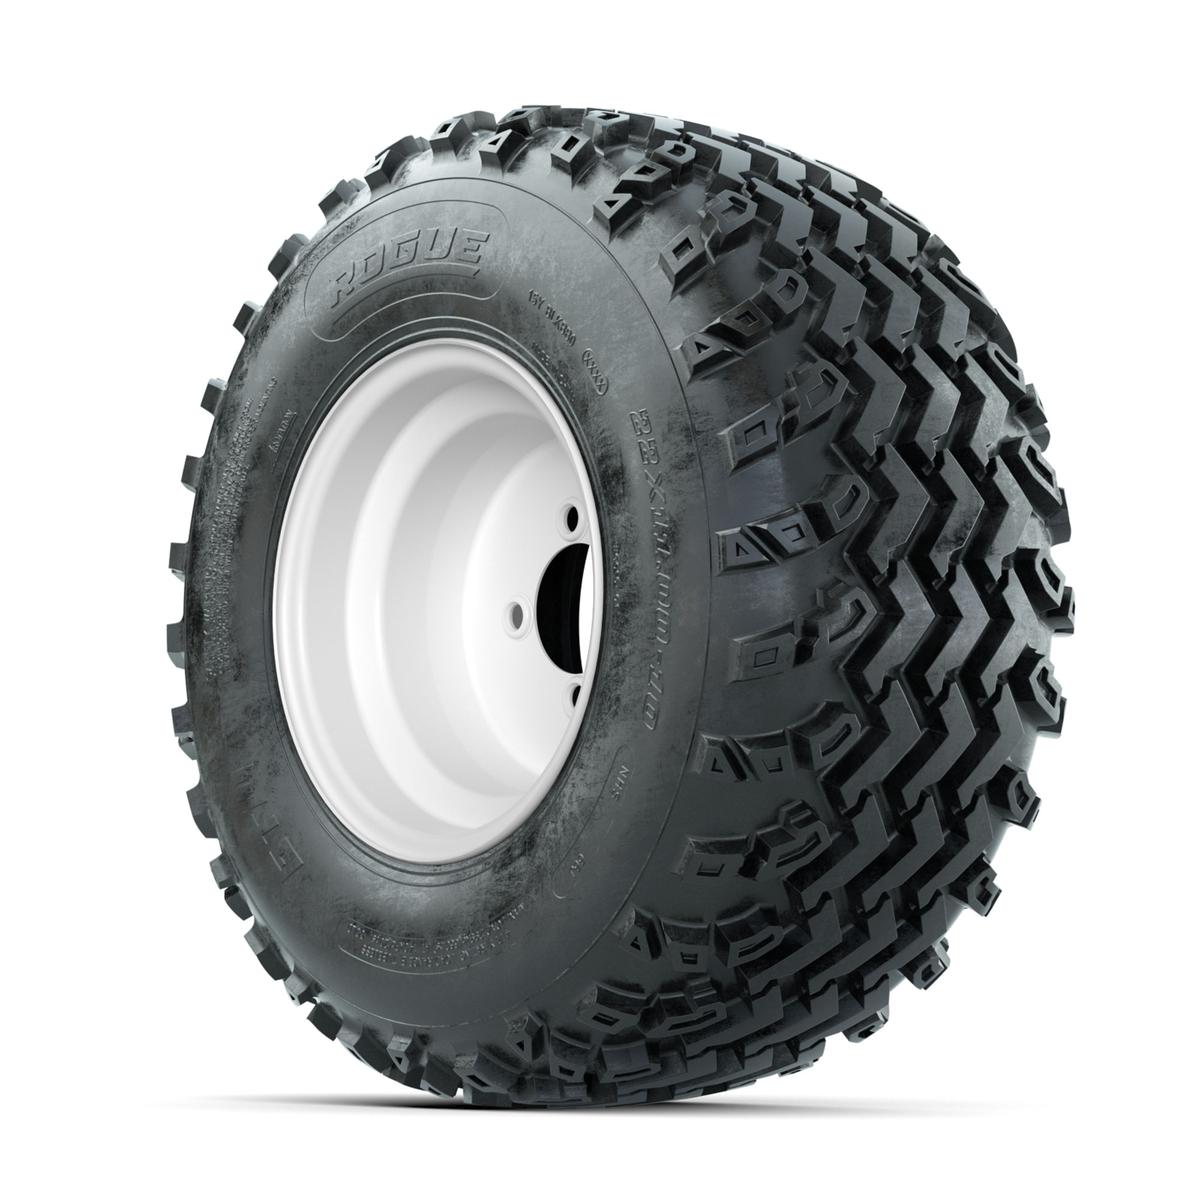 GTW Steel White 10 in Wheels with 22x11.00-10 Rogue All Terrain Tires – Full Set